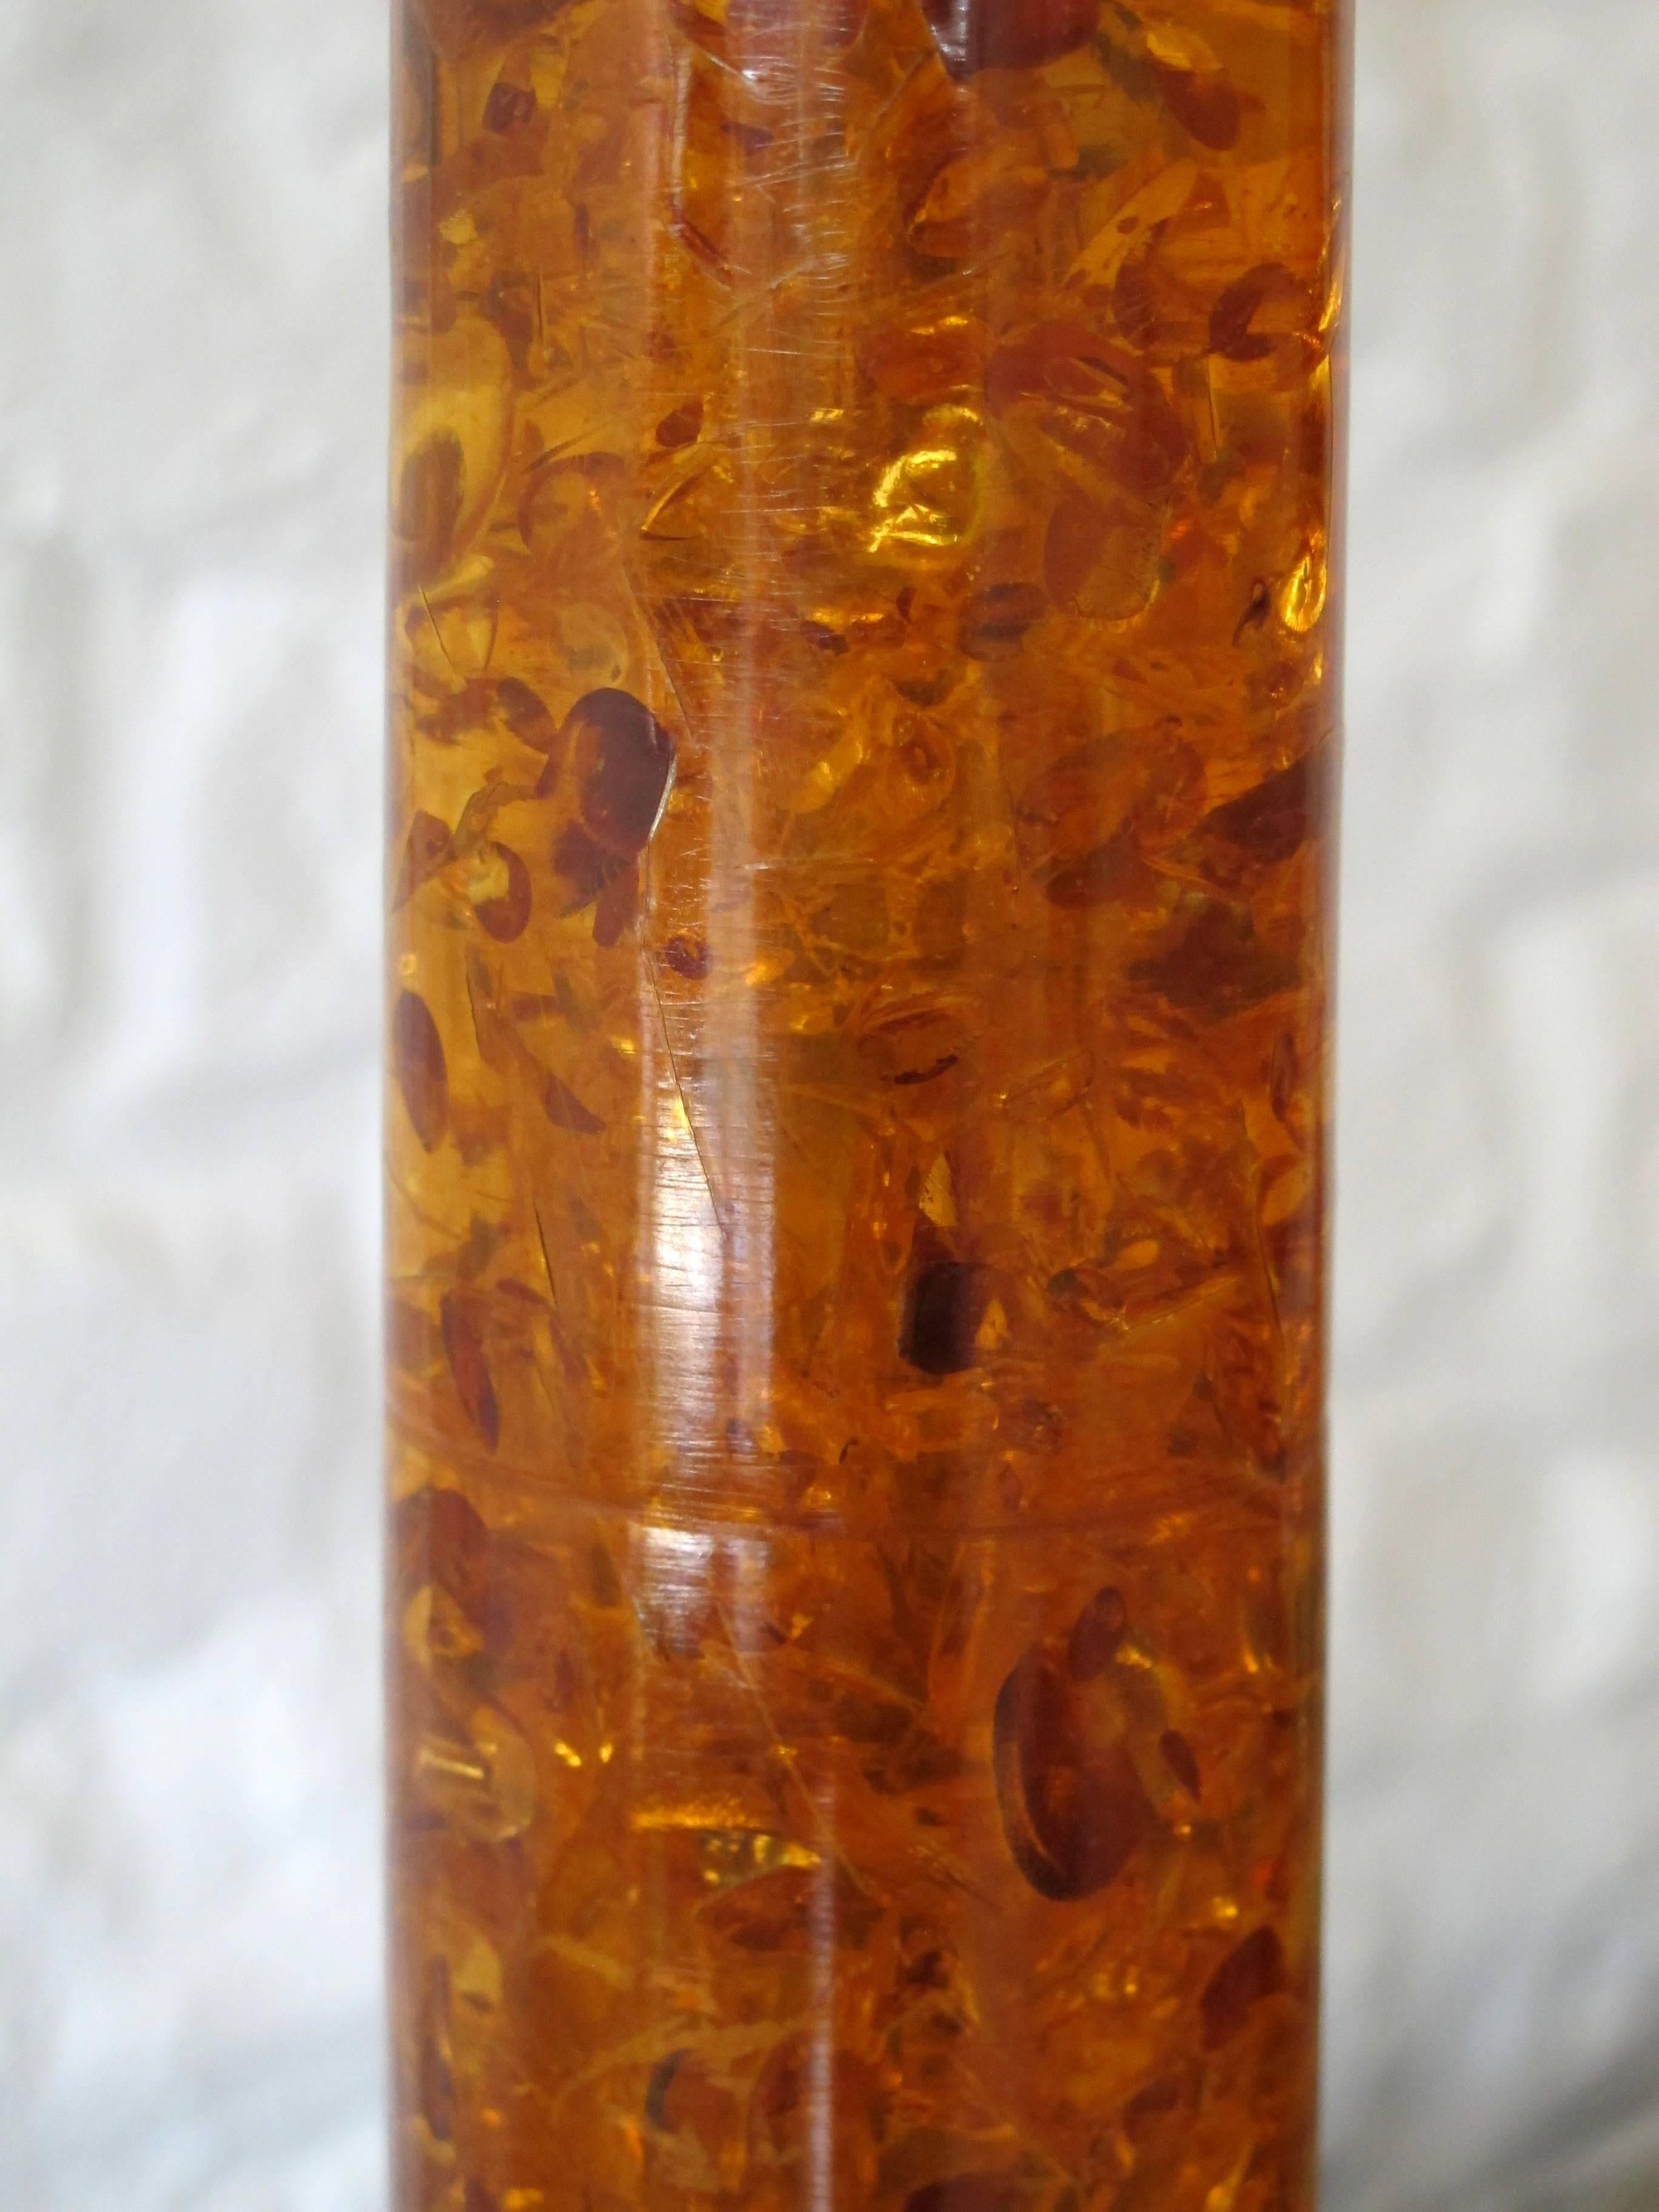 Table column lamp in amber resin and brass,
circa 1975.
France.

Measures: 69 x 12 x 12 cm.